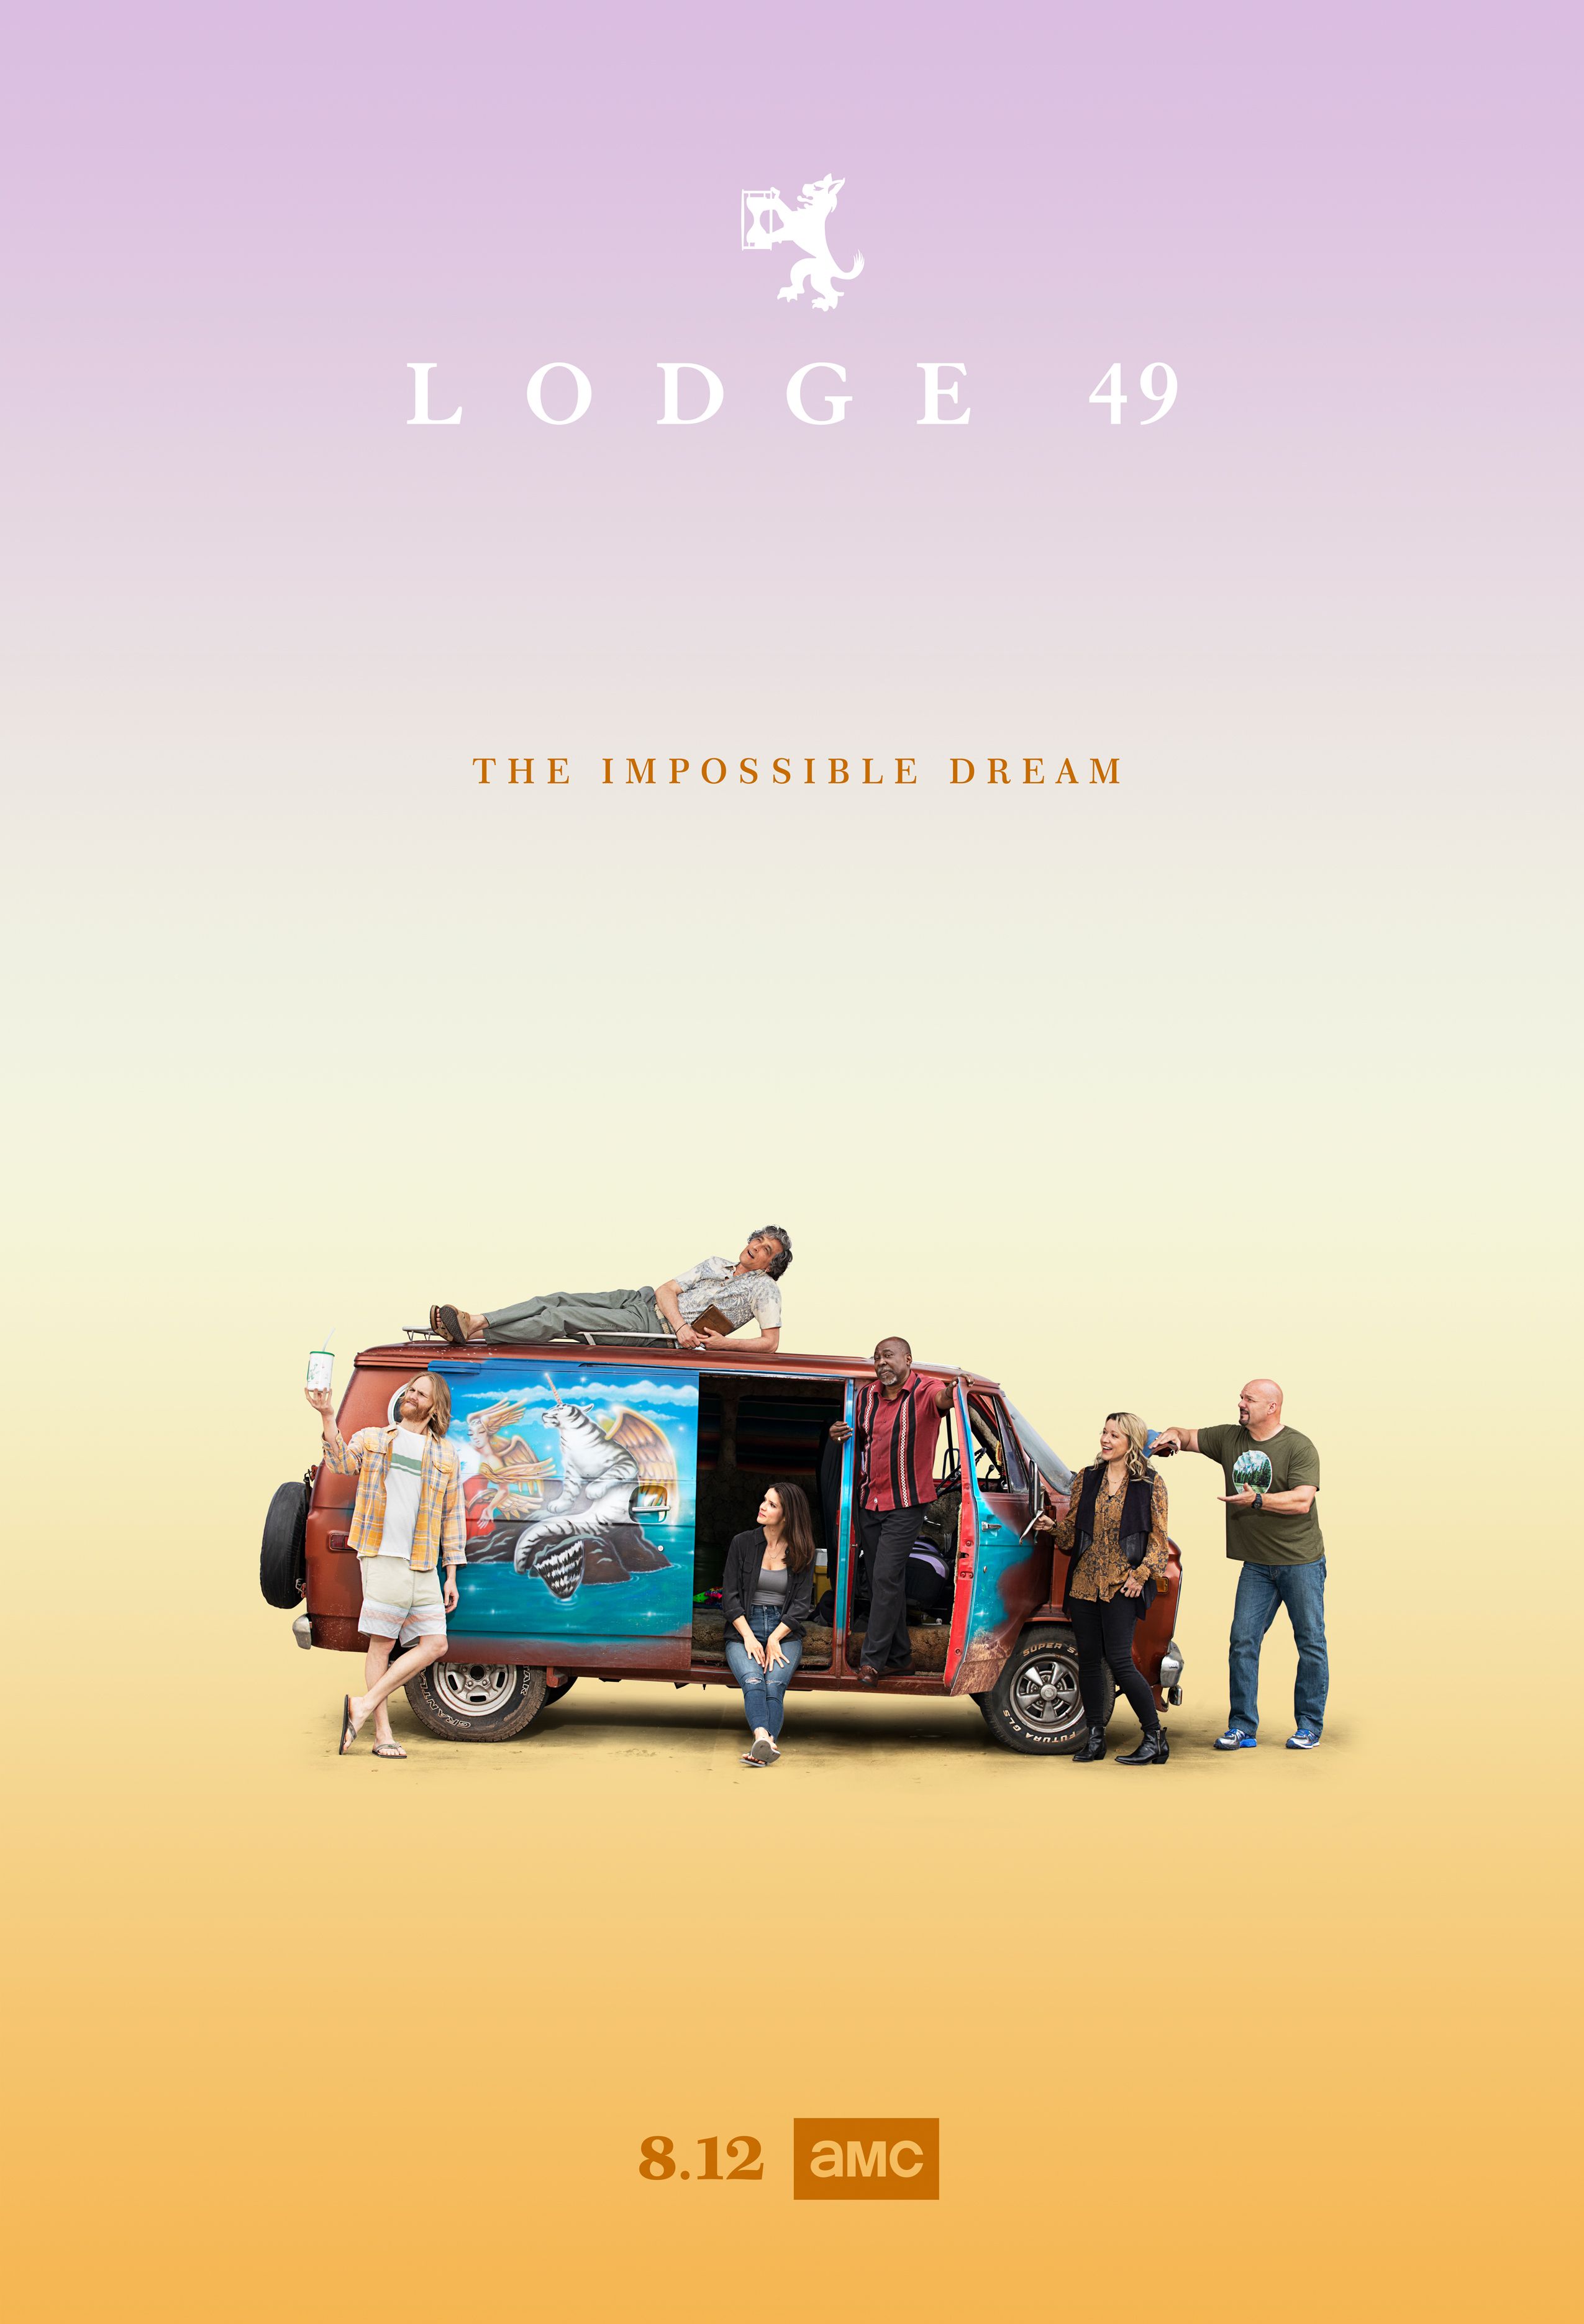 Lodge 49 TV Show Poster